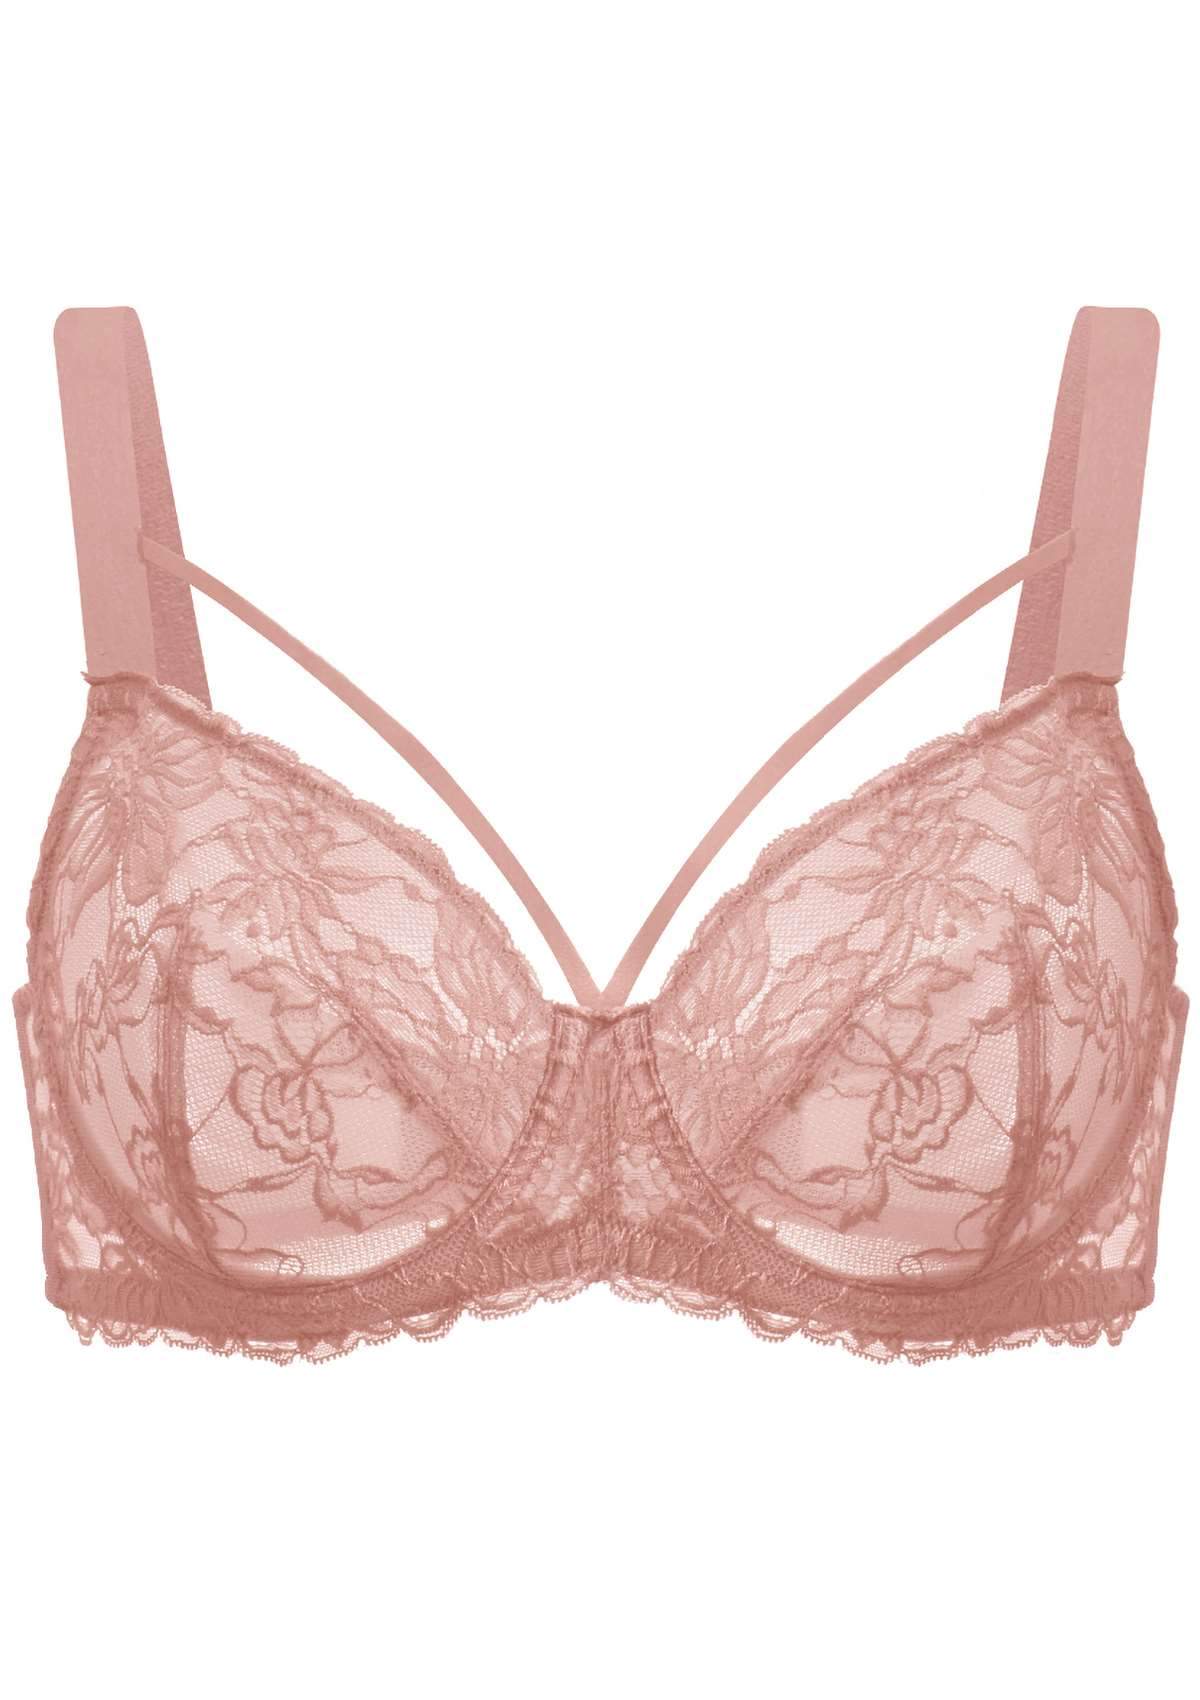 HSIA Pretty In Petals Lace Bra And Panty Sets: Bra For Big Boobs - Light Coral / 40 / C